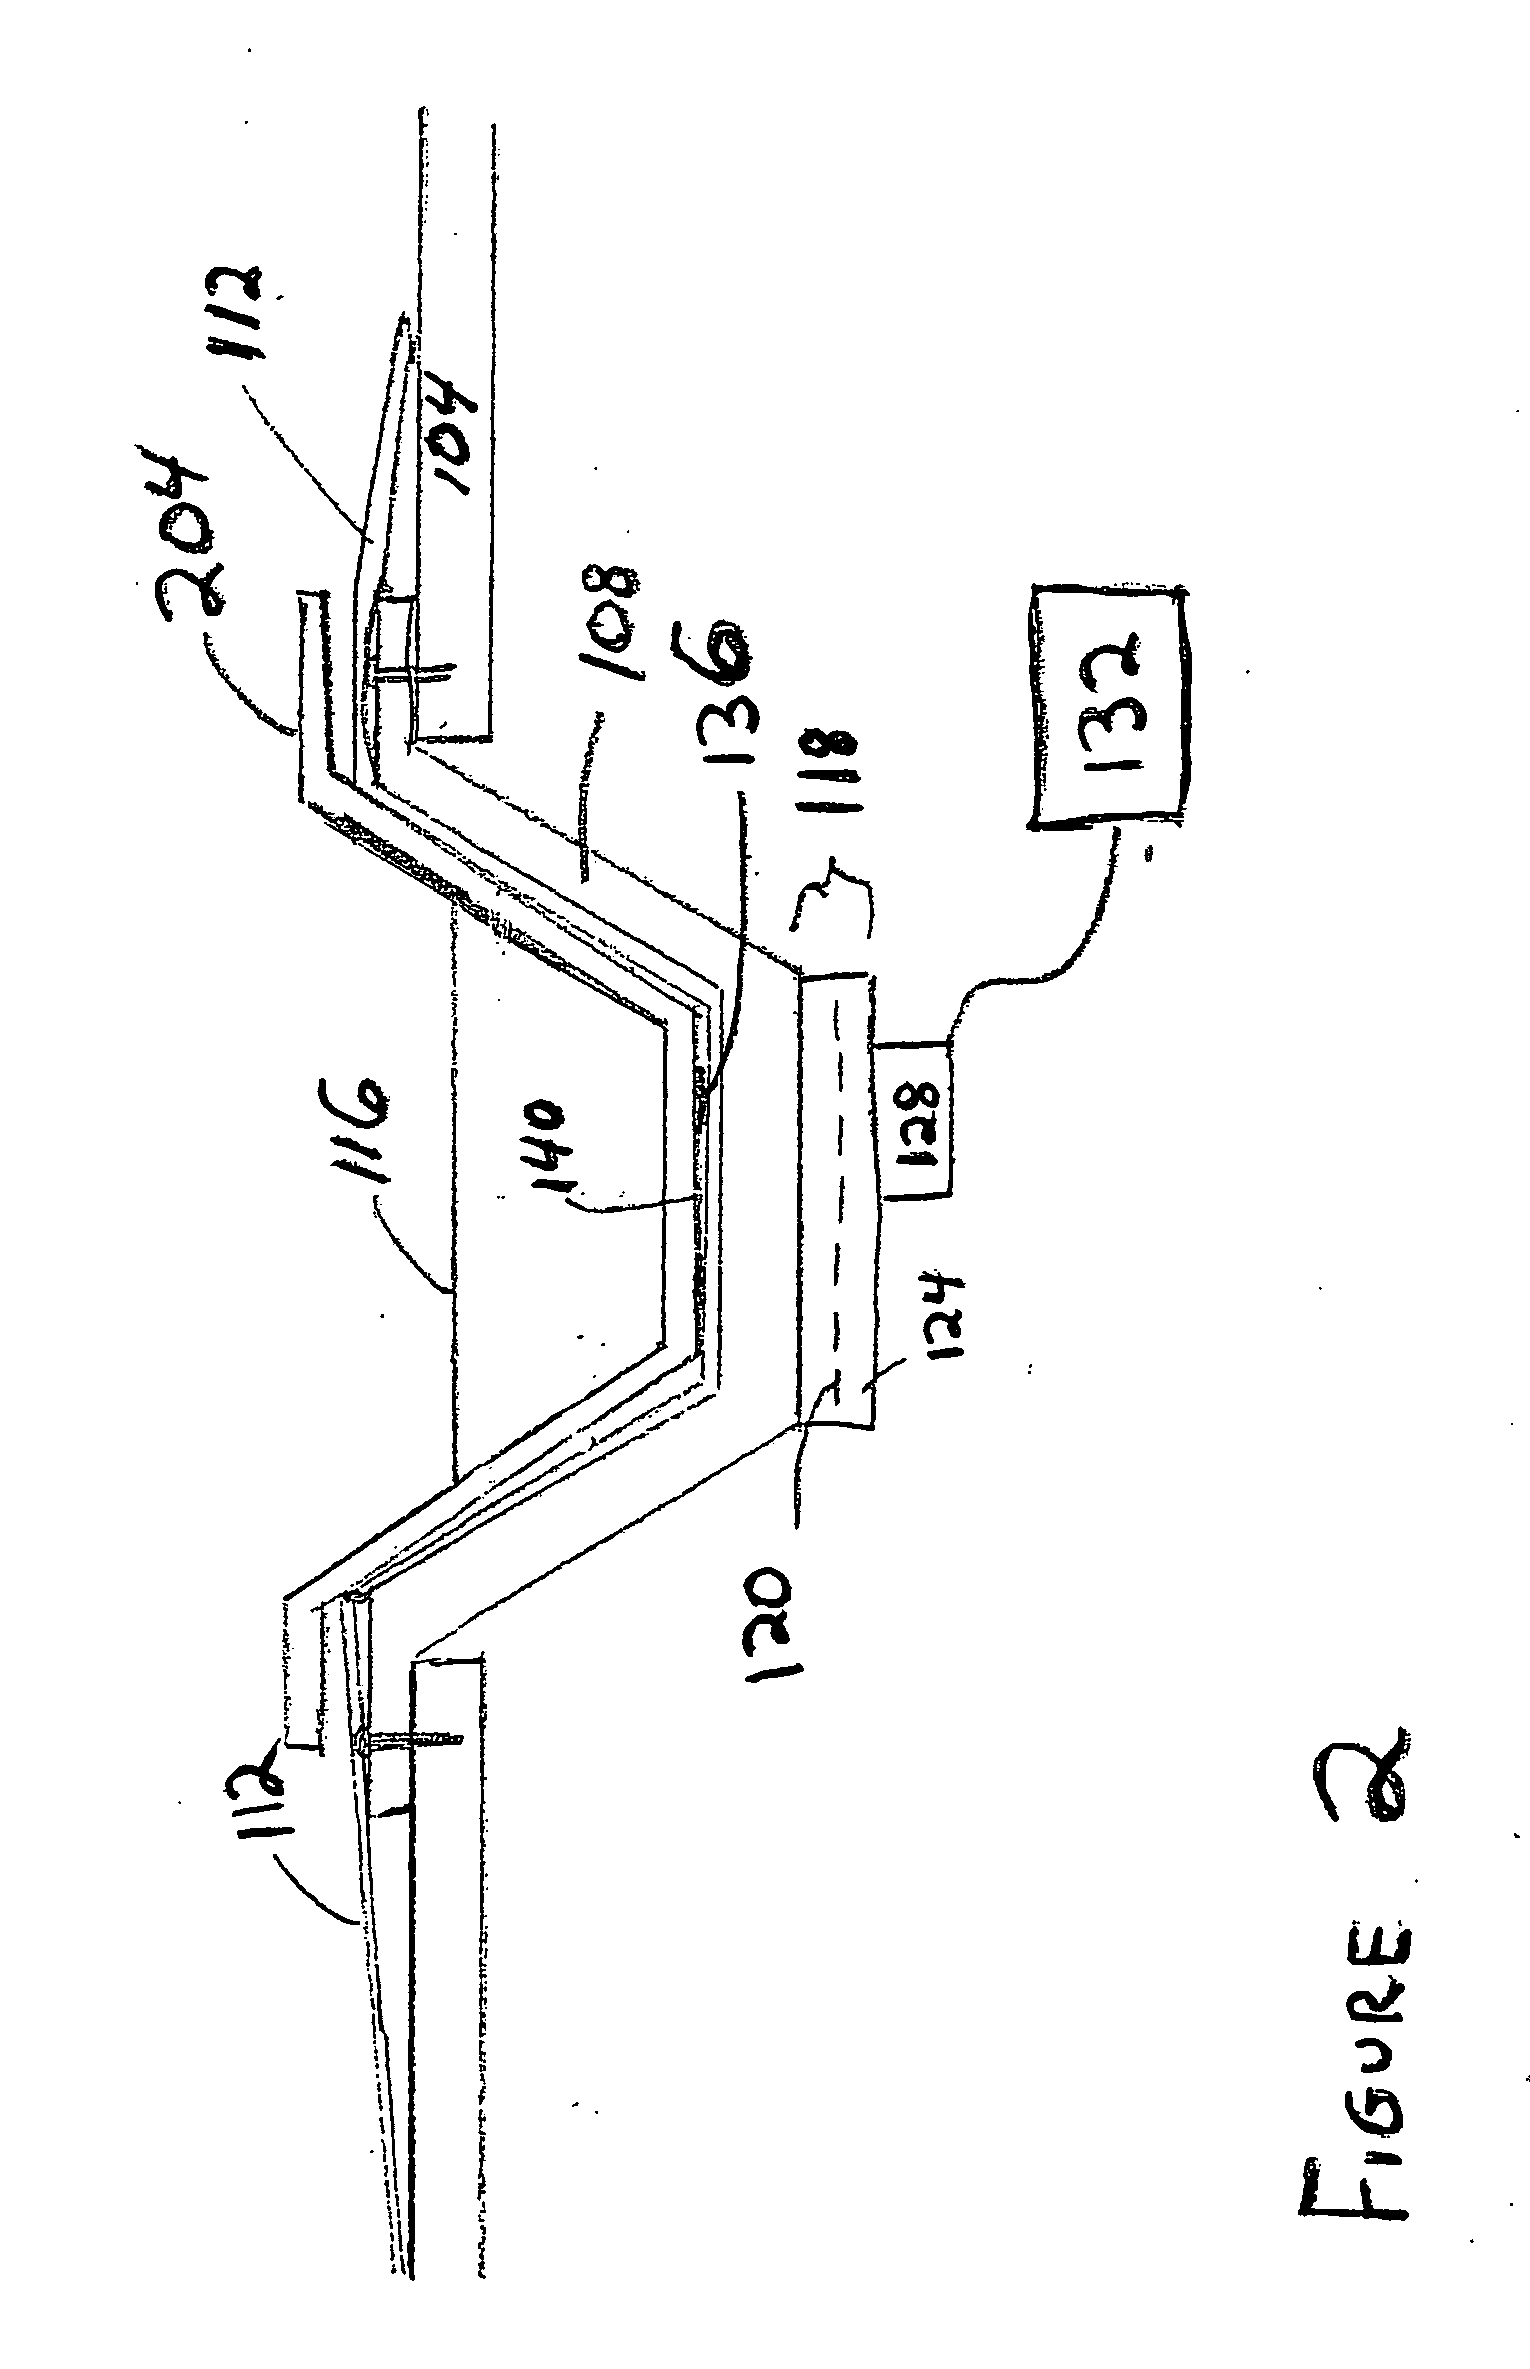 Heating element for liquid warming device